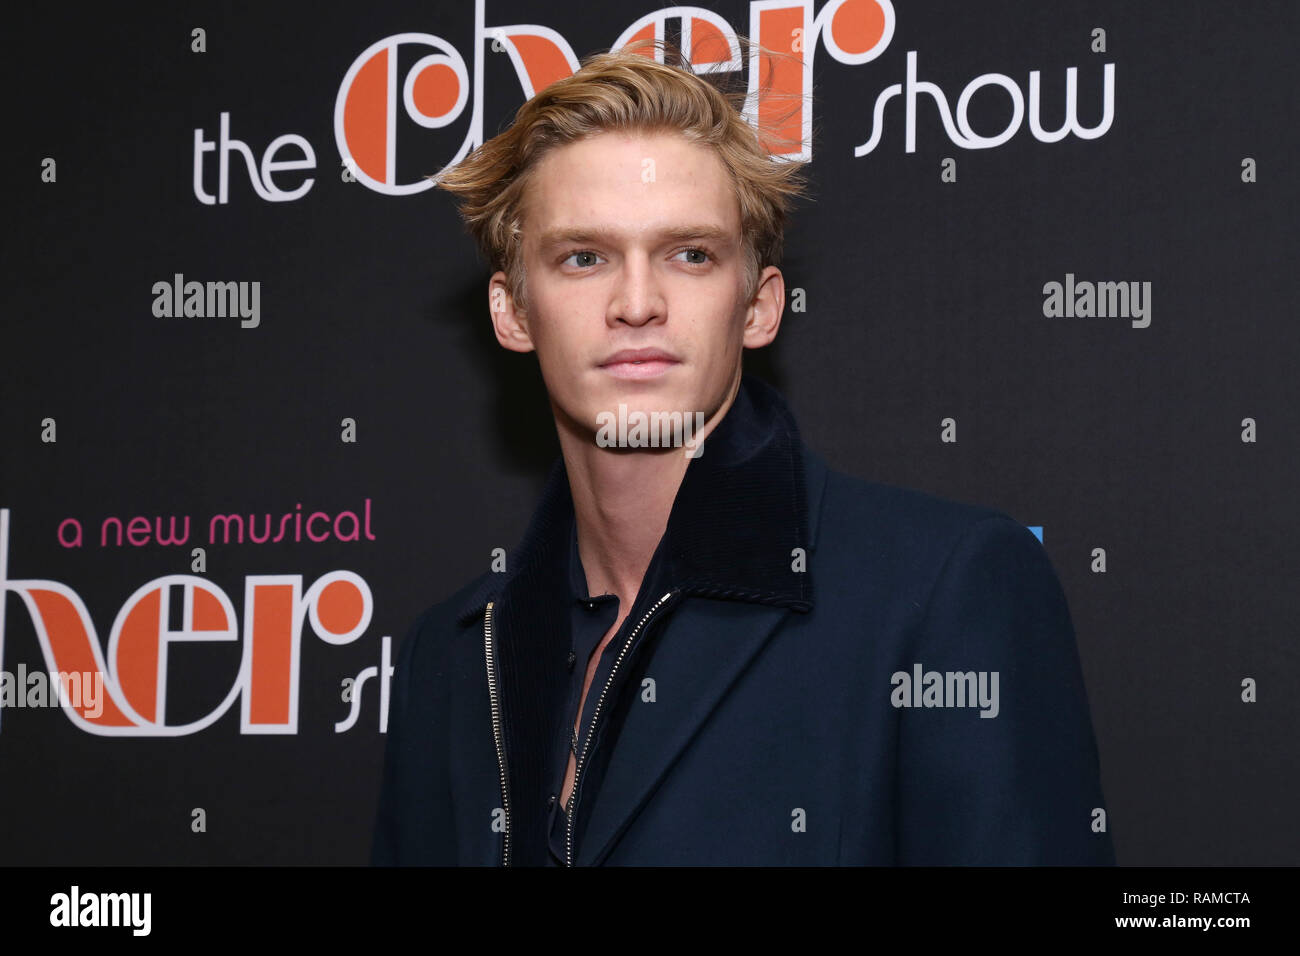 Opening night of The Cher Show at the Neil Simon Theatre - Arrivals.  Featuring: Cody Simpson Where: New York, New York, United States When: 03 Dec 2018 Credit: Joseph Marzullo/WENN.com Stock Photo